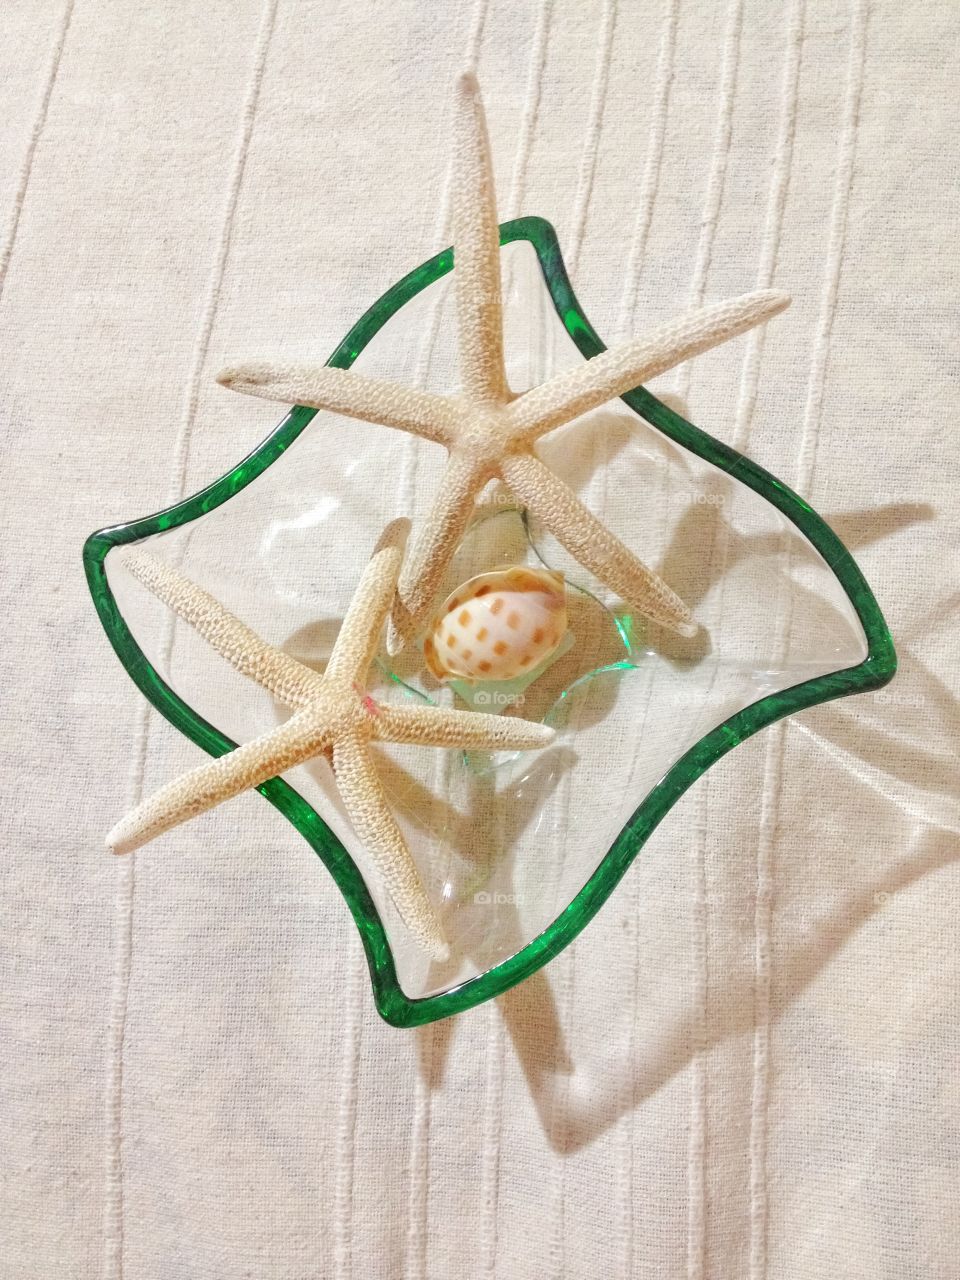 Glass container with starfishes and a shell